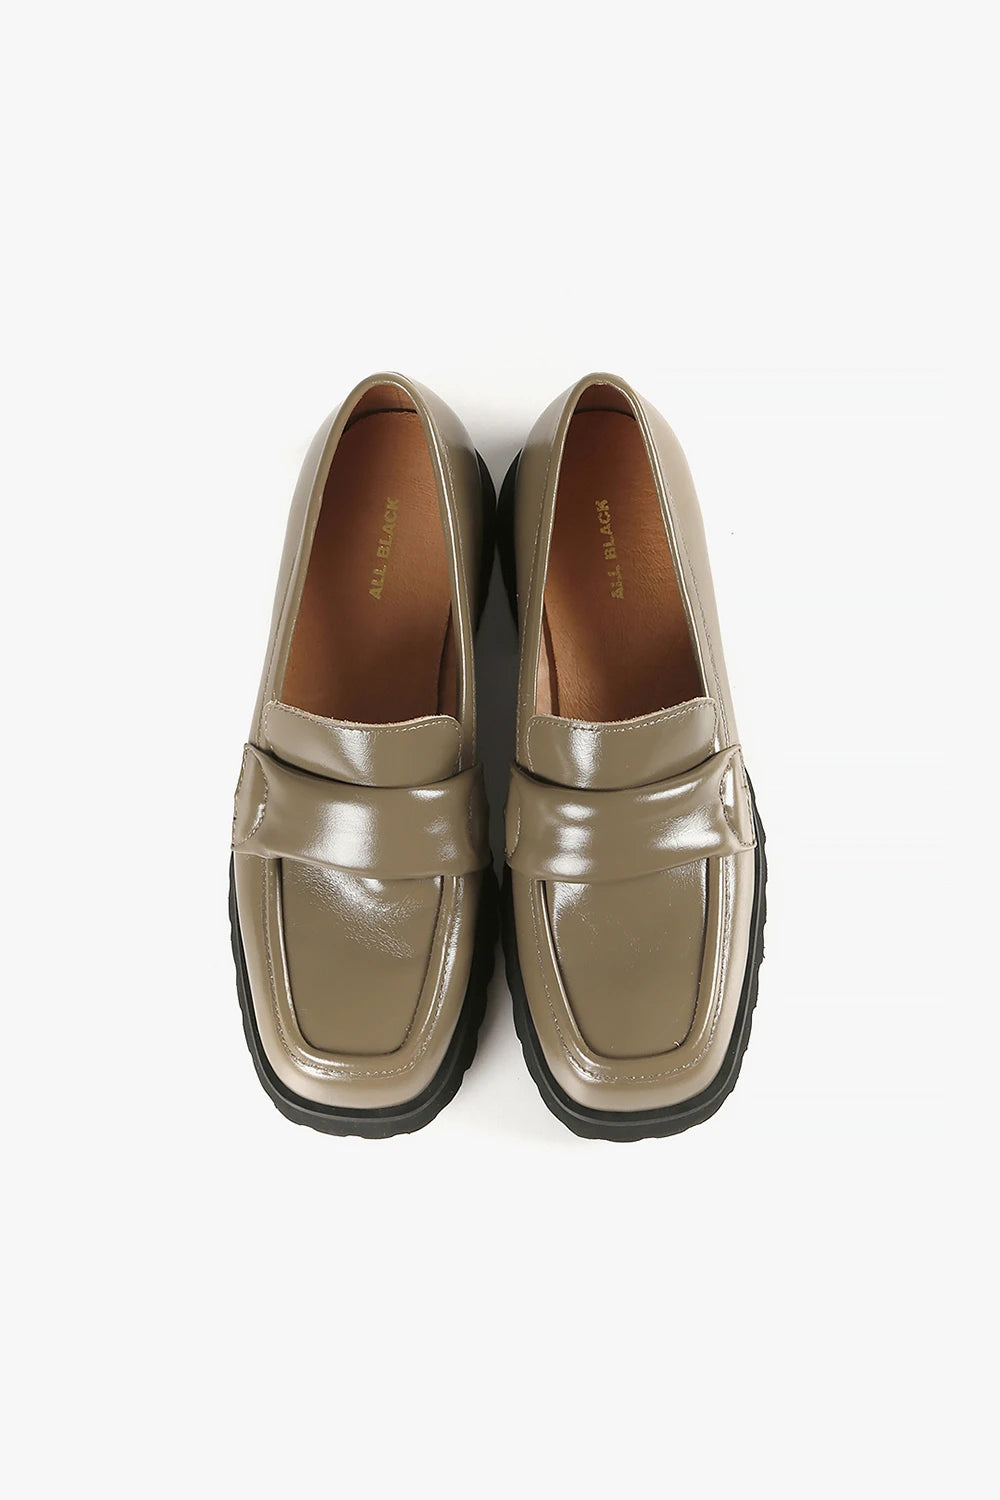 all black shoes banded lugg loafers in taupe leather